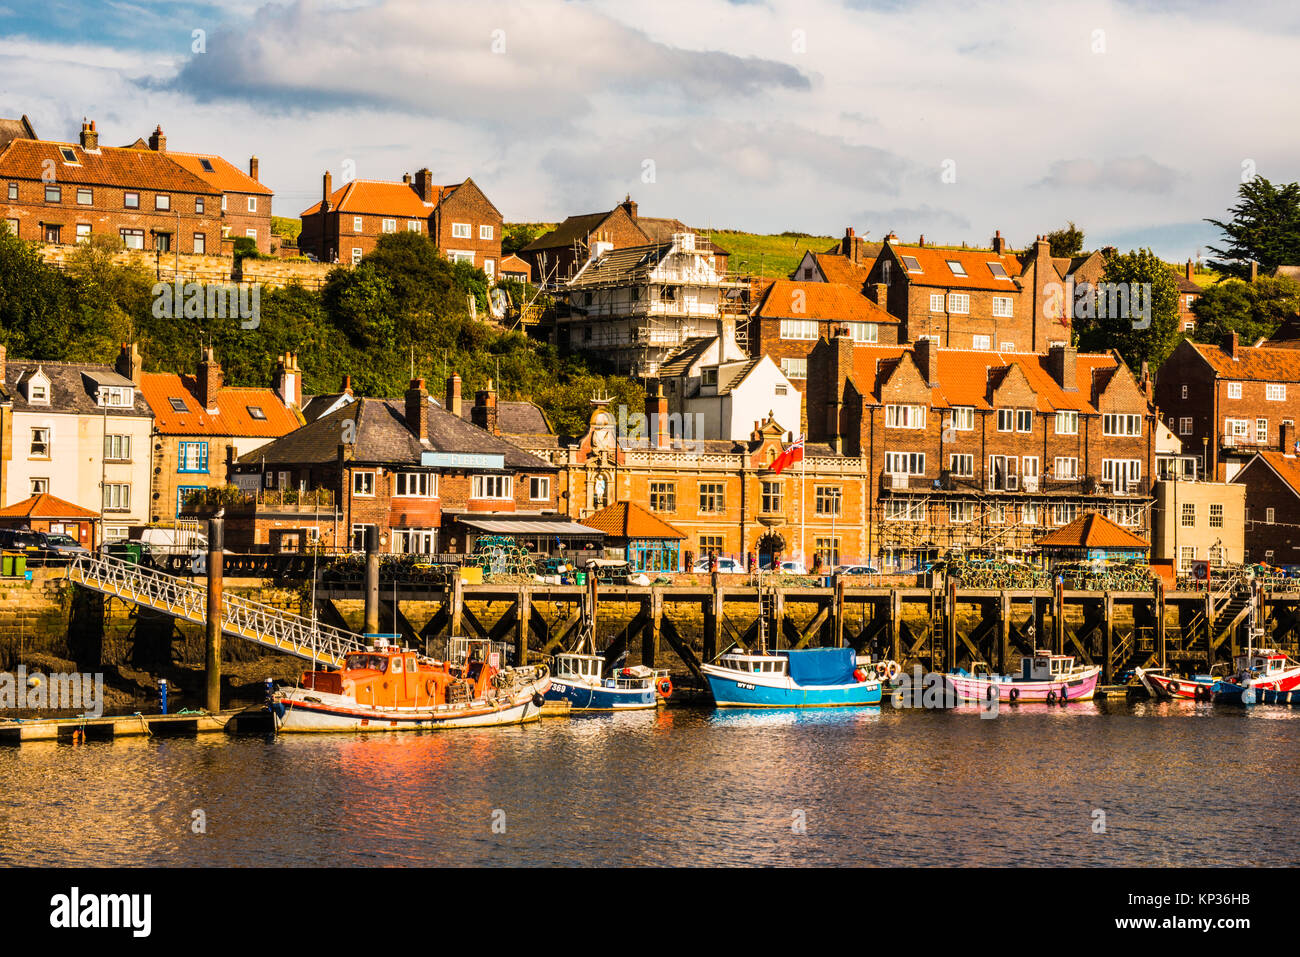 Life boat in the bay Whitby Yorkshire Ray Boswell Stock Photo